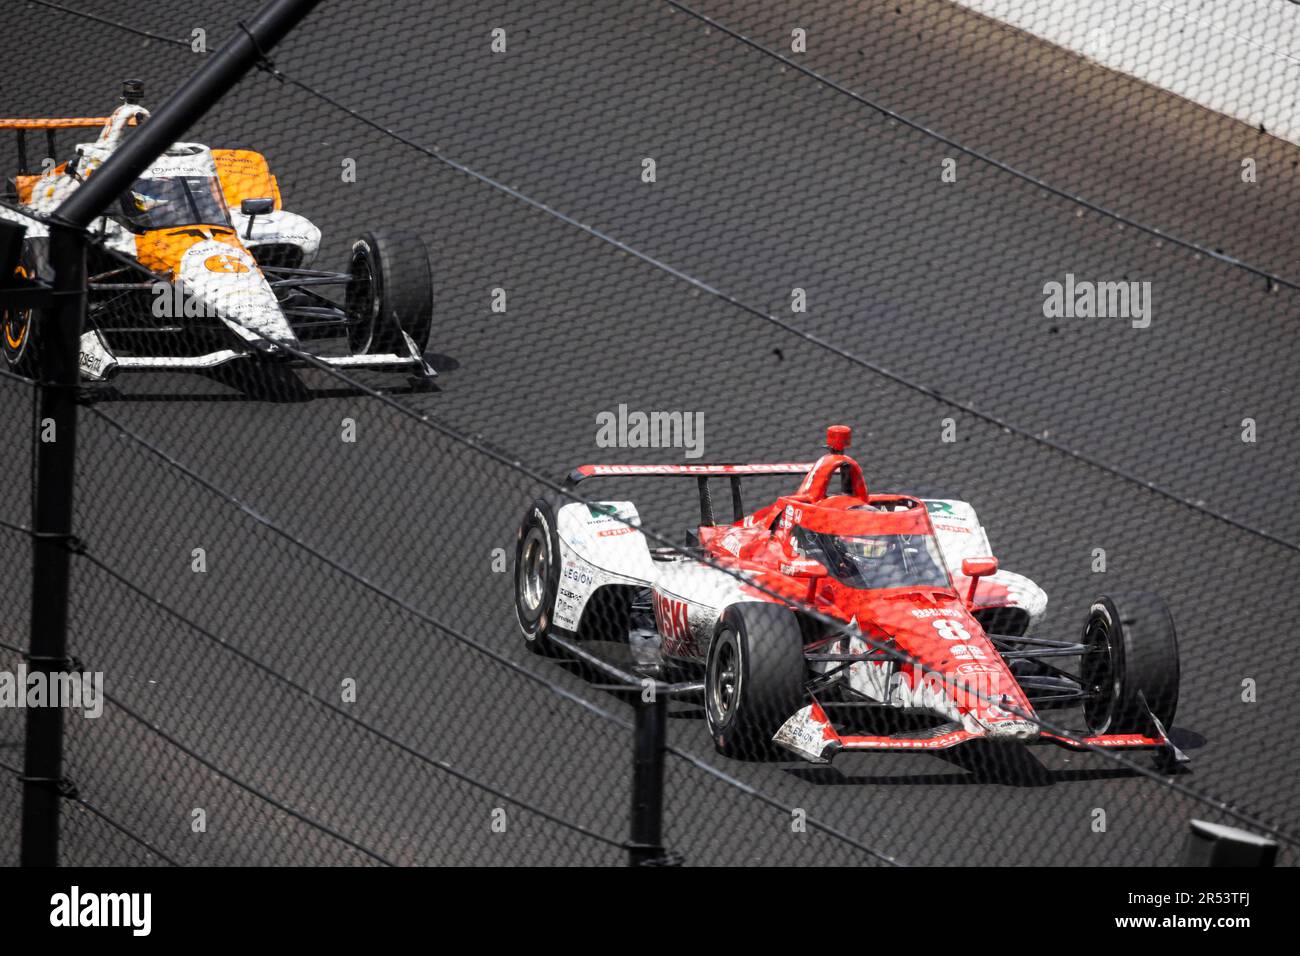 Driver Felix Rosenqvist (6) of Sweden and Chip Ganassi Racing driver Marcus Ericsson (8) of Sweden race during the 2023 Indy 500 at Indianapolis Motor Speedway in Indianapolis. Stock Photo